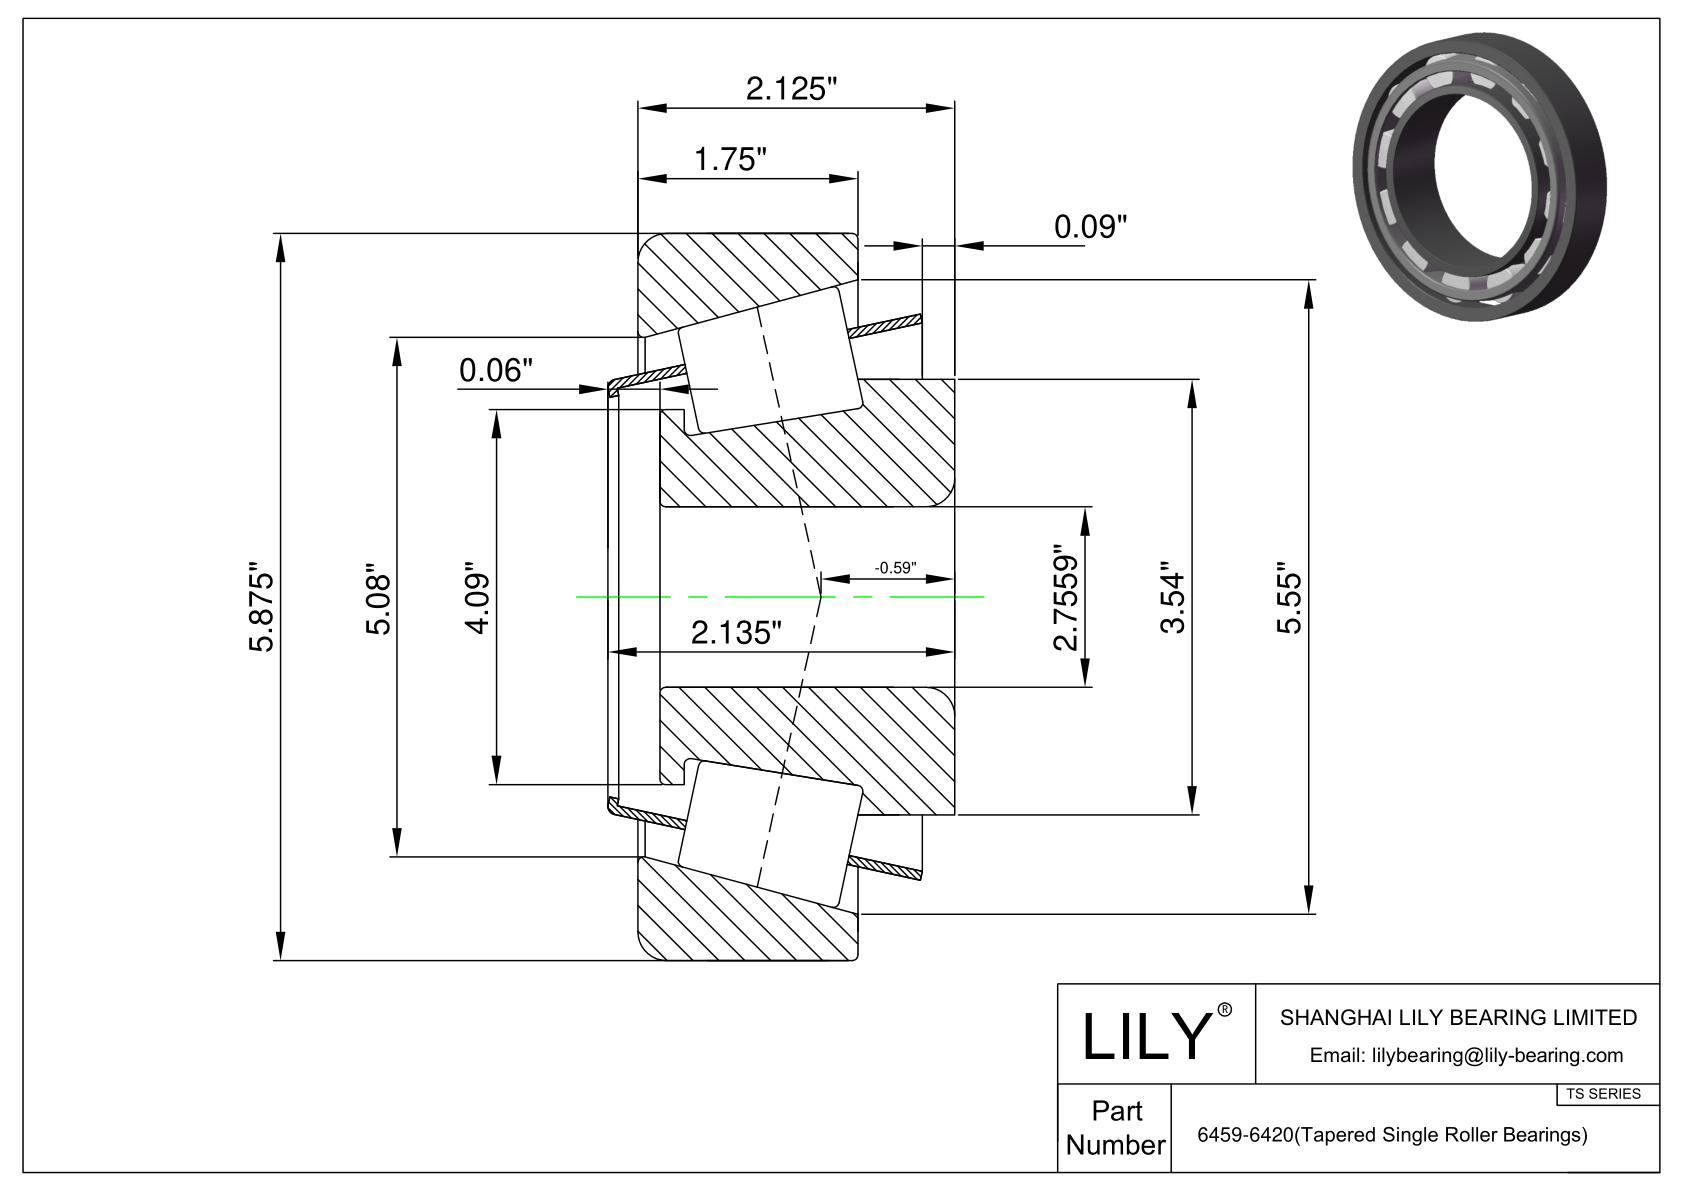 6459-6420 TS (Tapered Single Roller Bearings) (Imperial) cad drawing